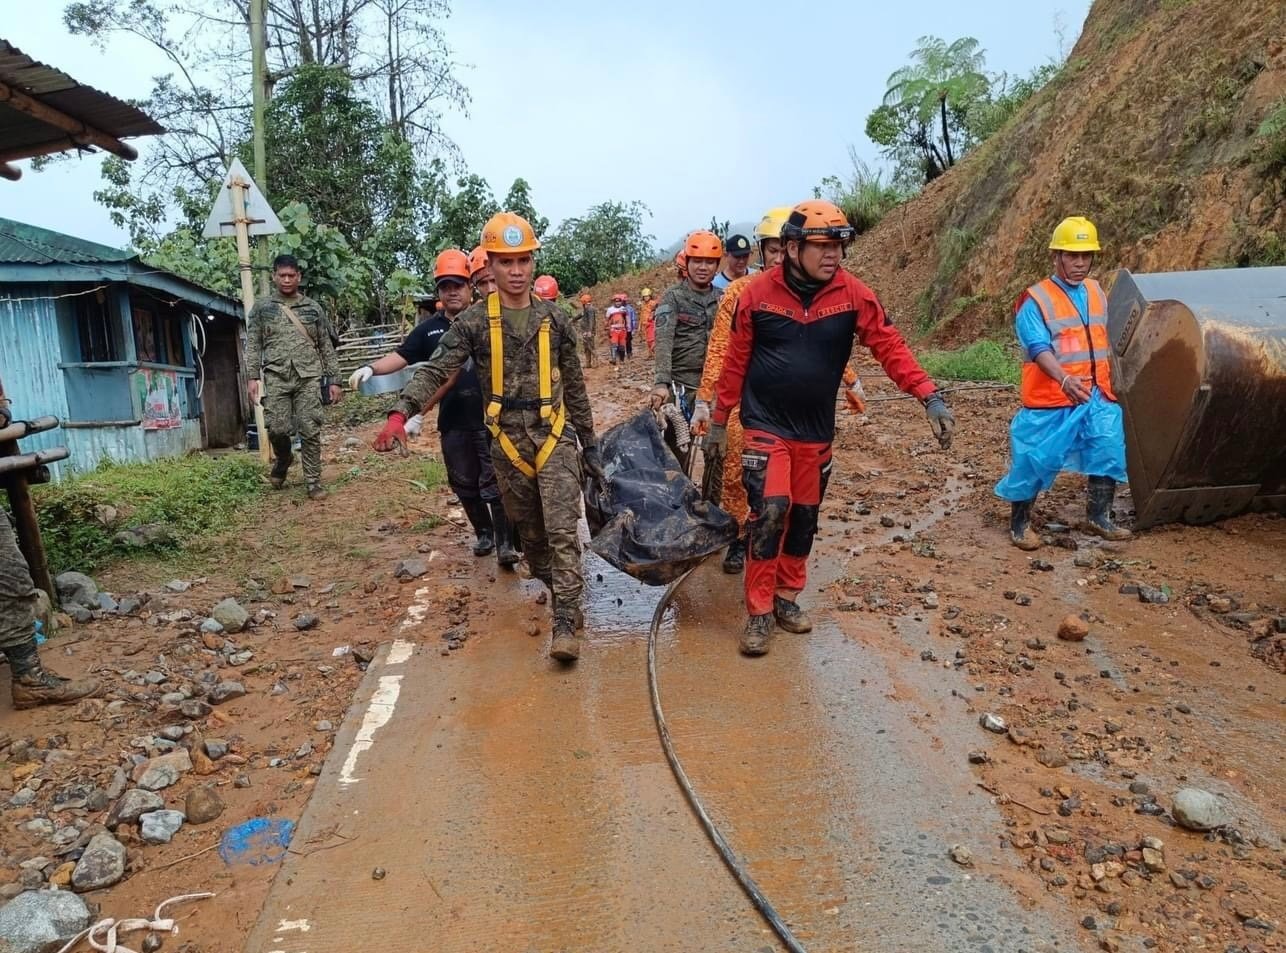 At least ten people were killed following a landslide that buried houses from heavy rain in the remote town of Monkayo, the Philippines. Photo: EPA-EFE/Municipality of Monkayo/Handout